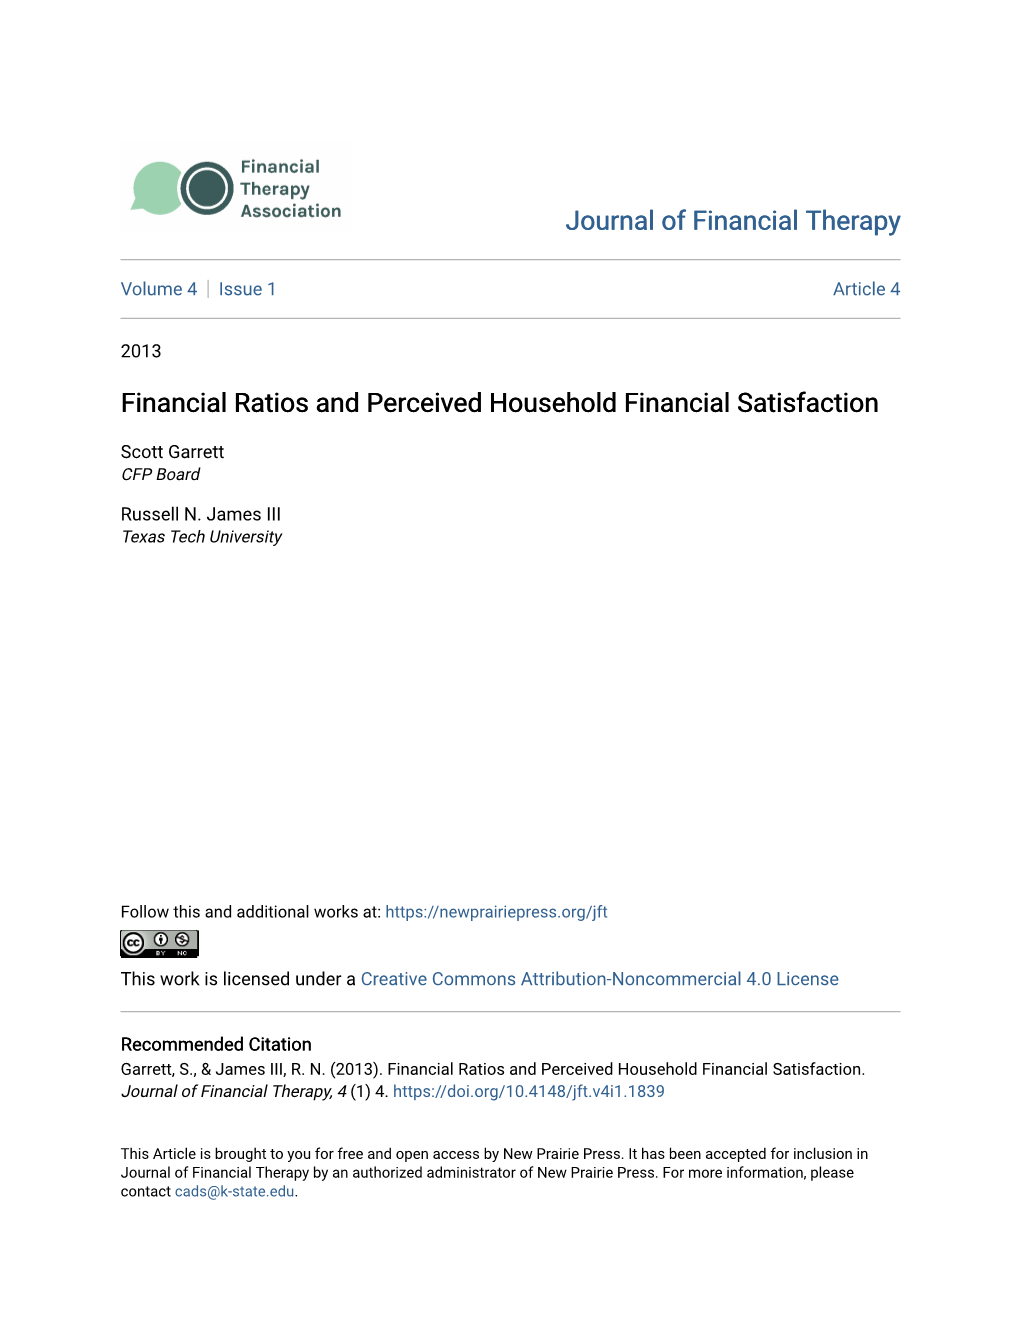 Financial Ratios and Perceived Household Financial Satisfaction